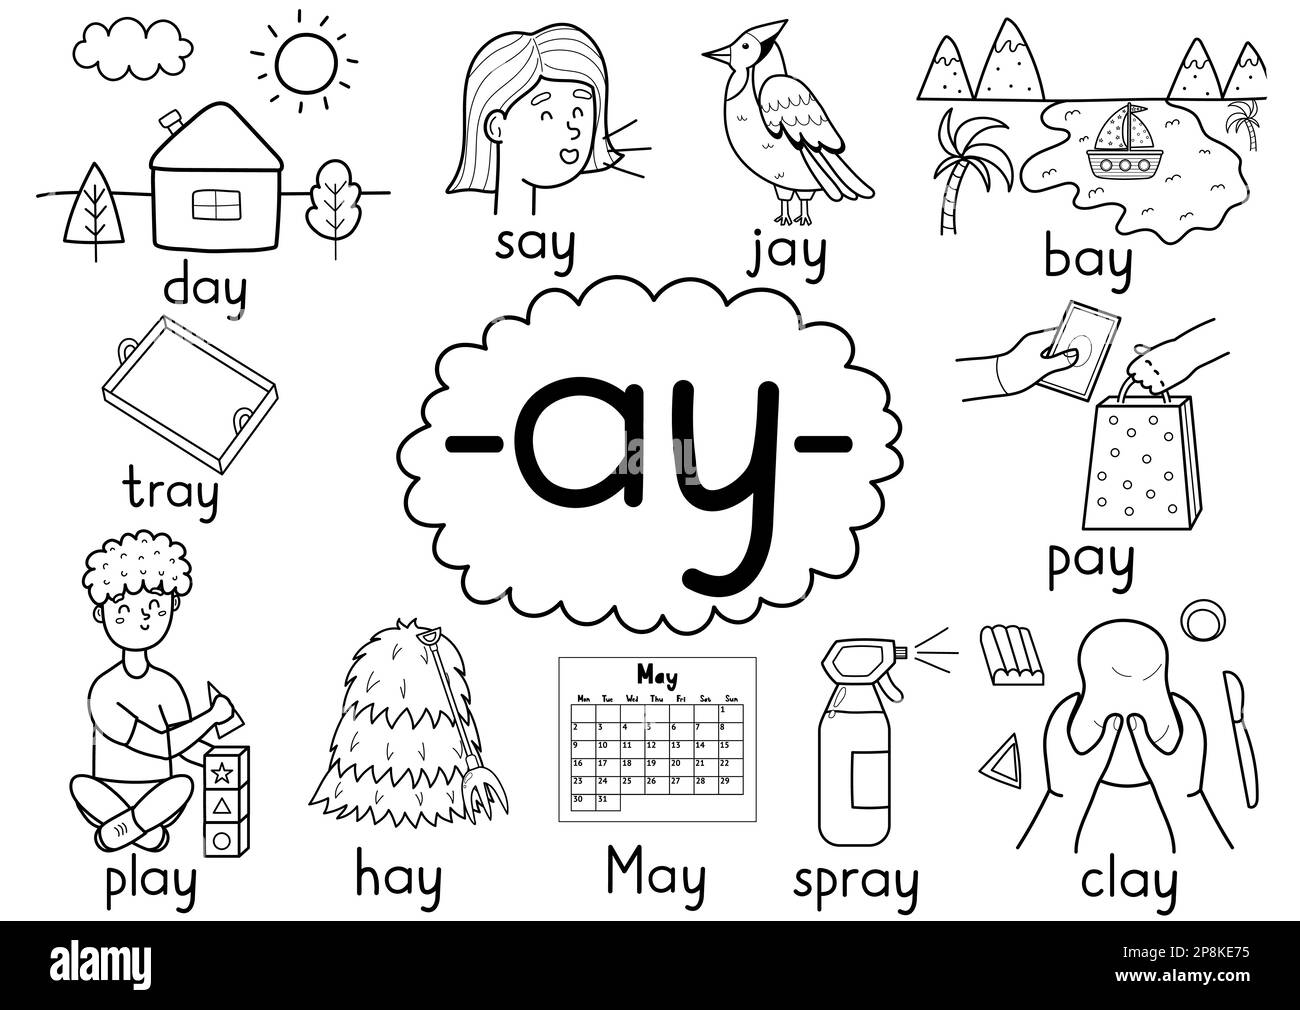 Ay digraph spelling rule black and white educational poster for kids Stock Vector